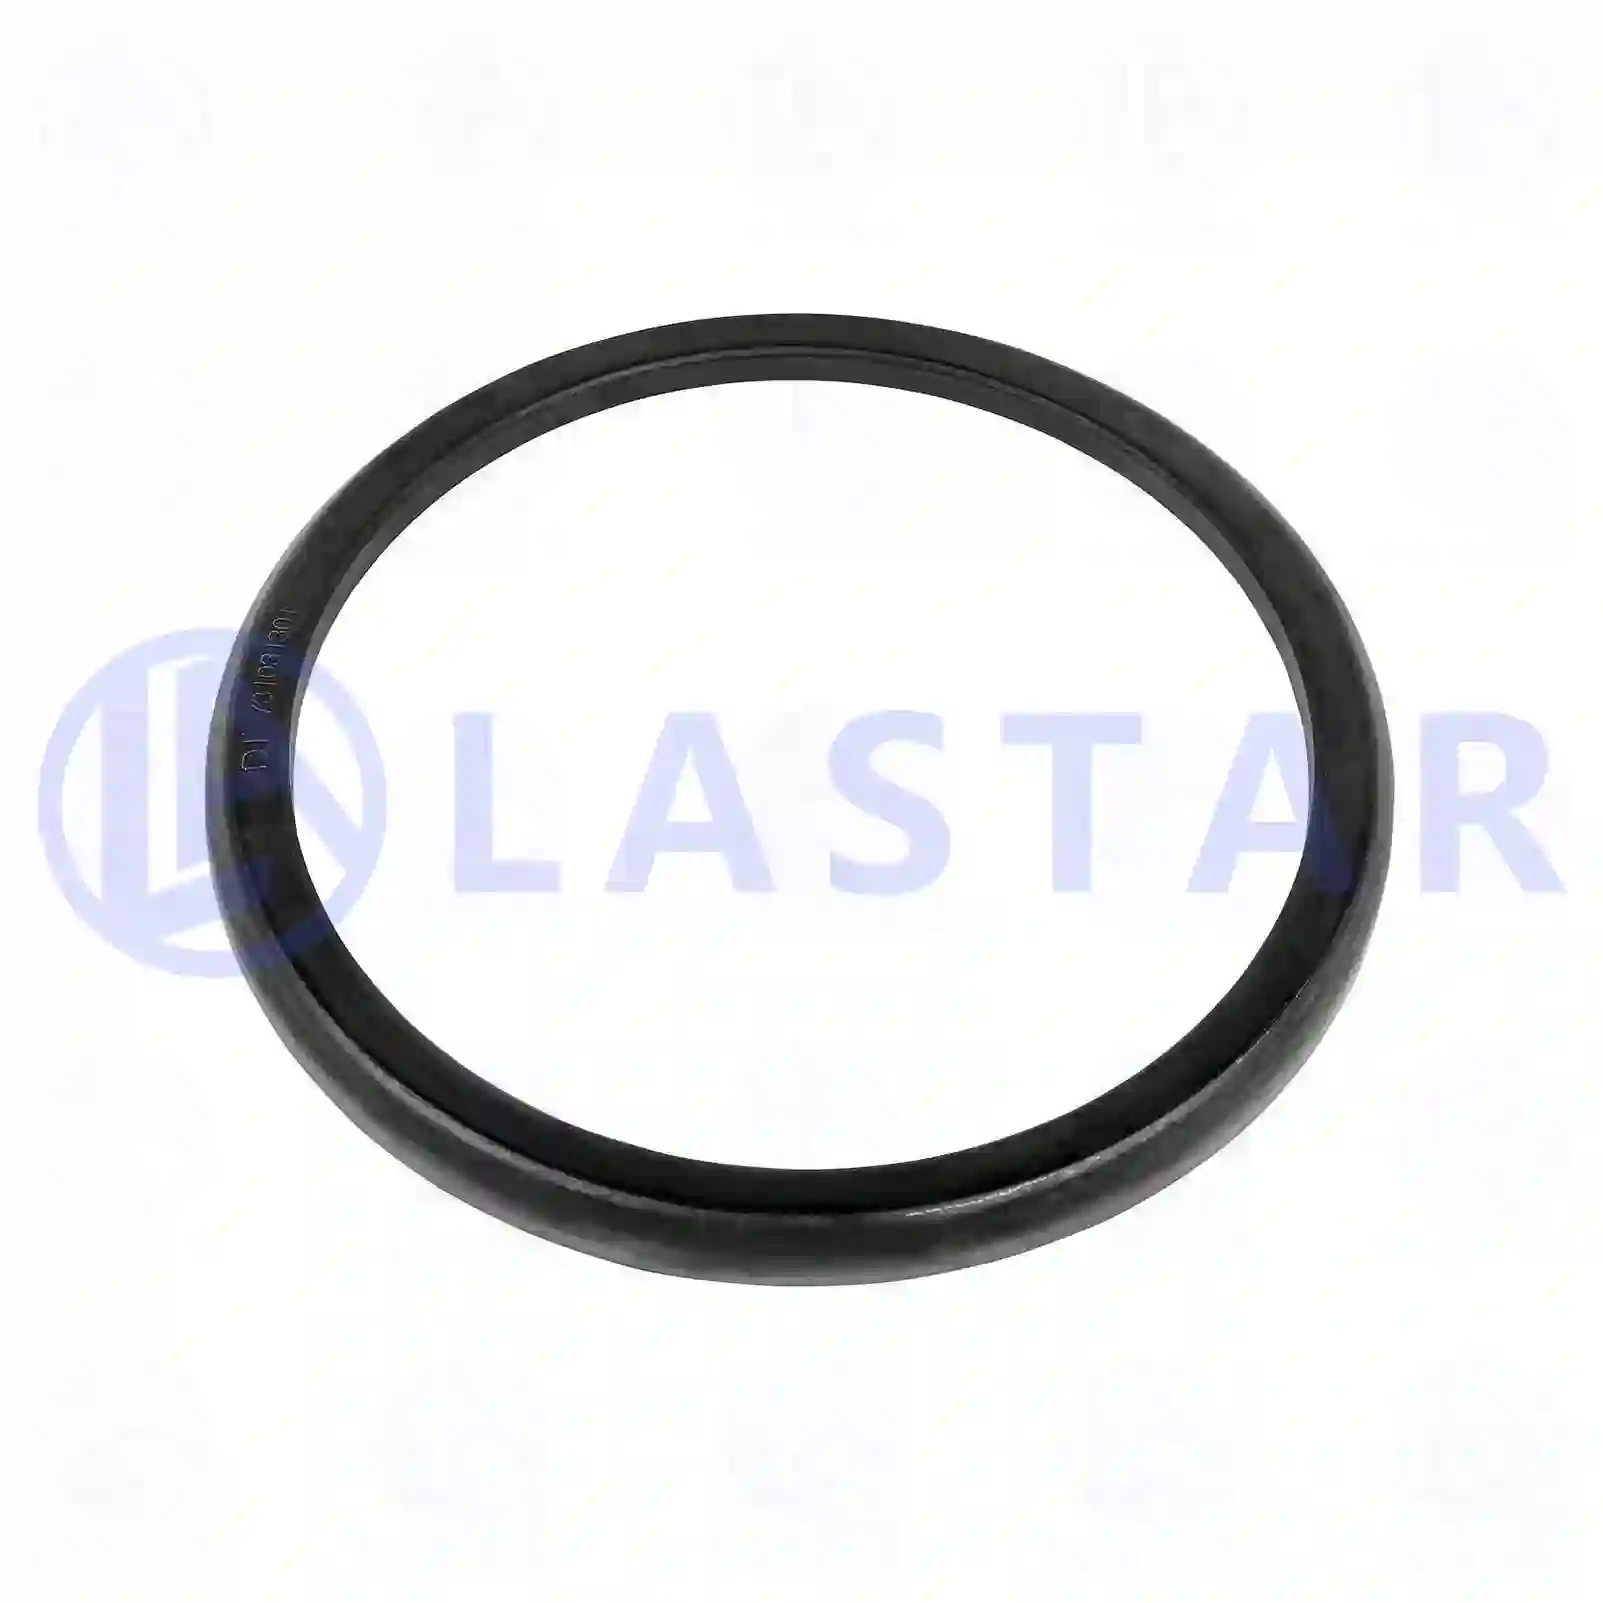 Protection ring, 77730009, 1386104, ZG30105-0008, ||  77730009 Lastar Spare Part | Truck Spare Parts, Auotomotive Spare Parts Protection ring, 77730009, 1386104, ZG30105-0008, ||  77730009 Lastar Spare Part | Truck Spare Parts, Auotomotive Spare Parts